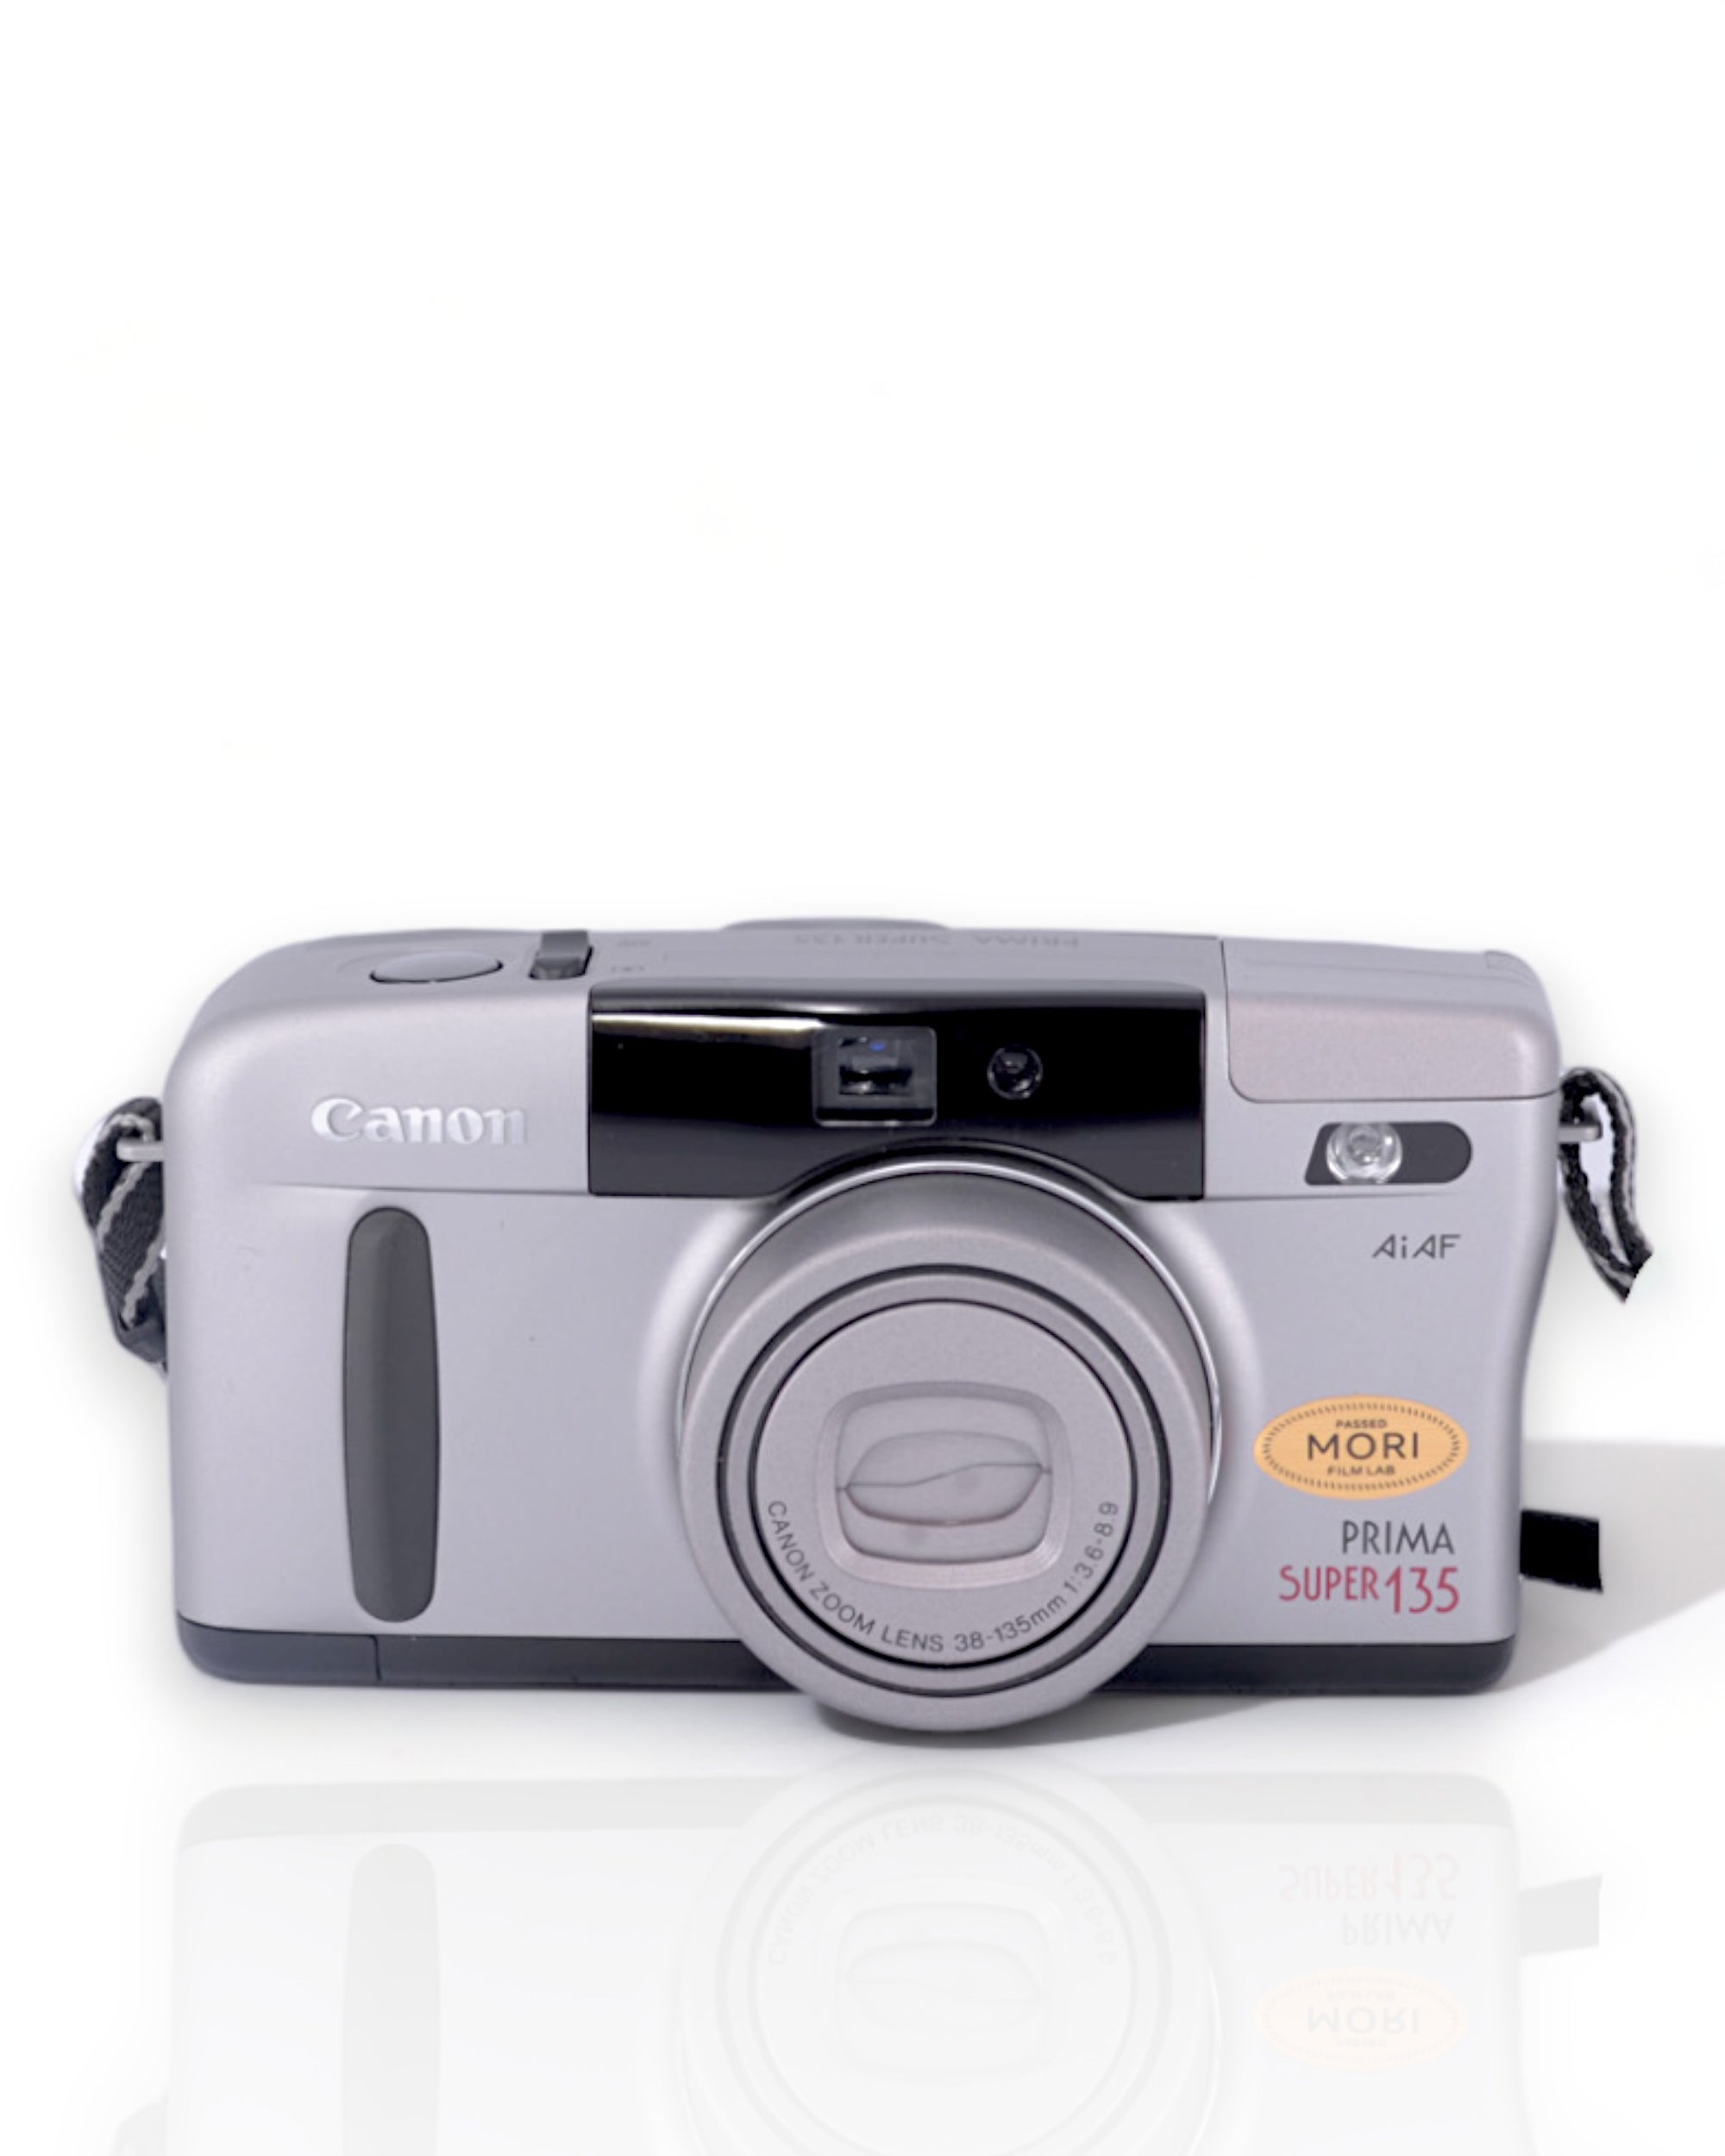 Canon Prima Super 135 35mm Point & Shoot Film Camera with 38-135mm Lens